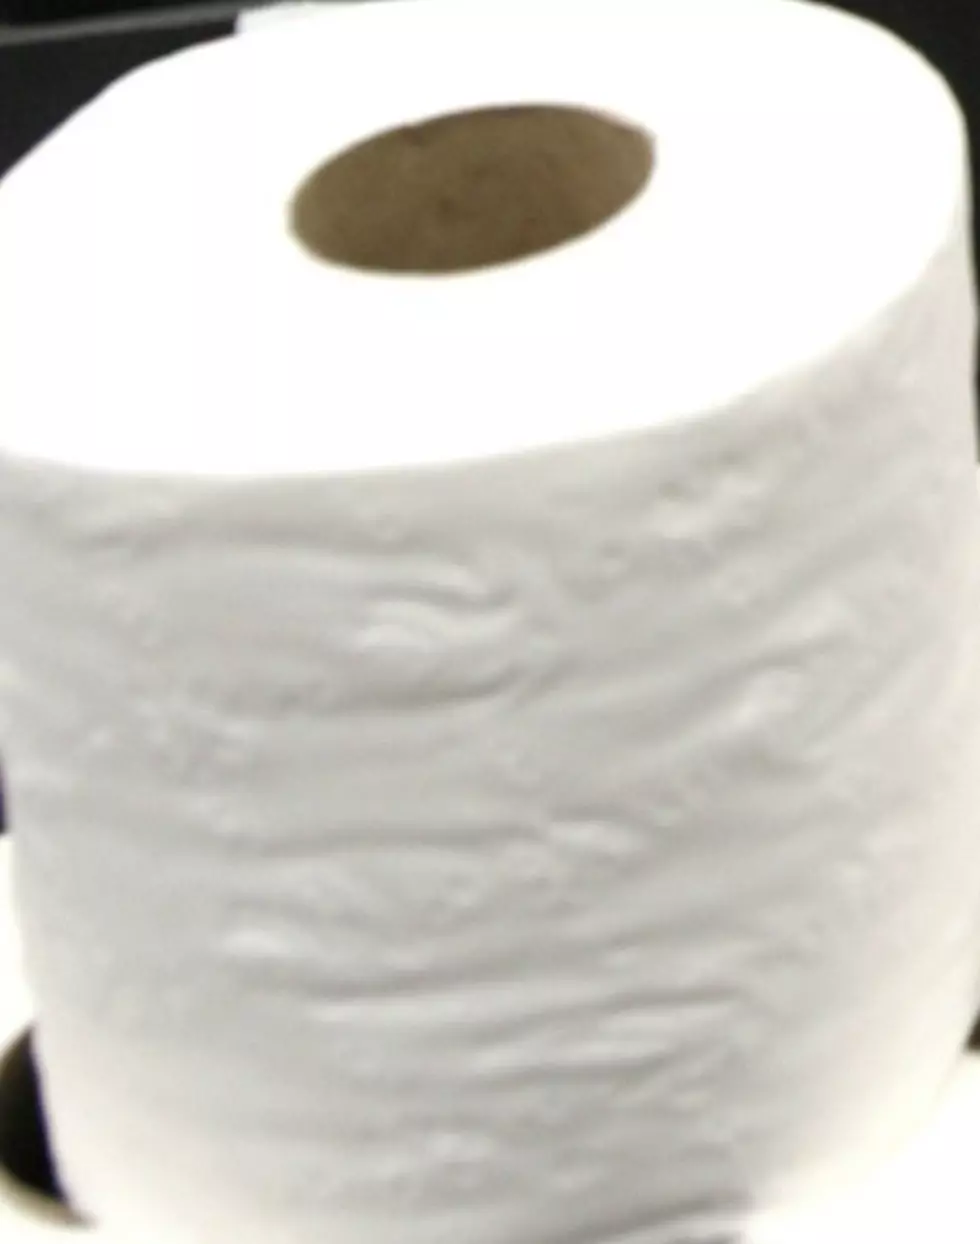 Mom Gets Creative & Uses Toilet Paper As Kids’ Allowance